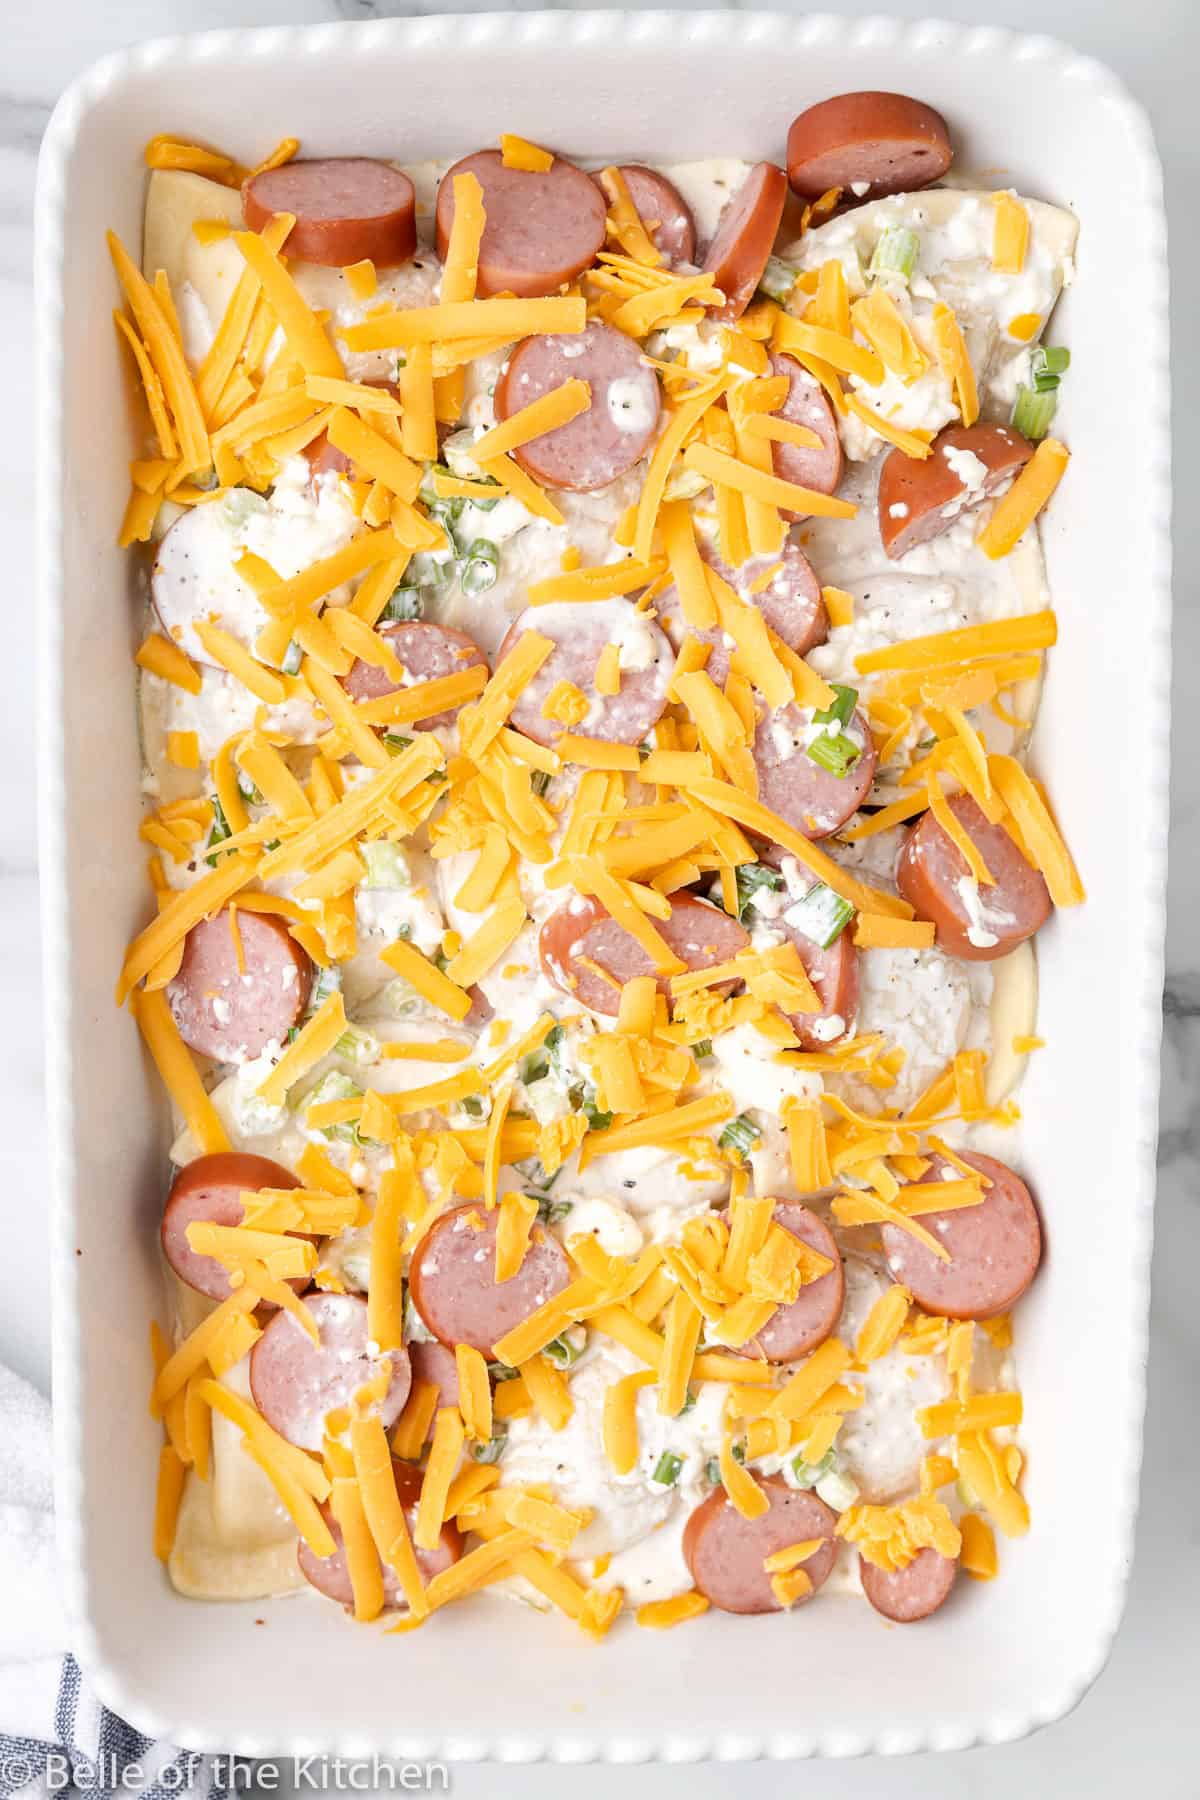 a casserole dish full of pierogies, sausage, cheese, and green onions.